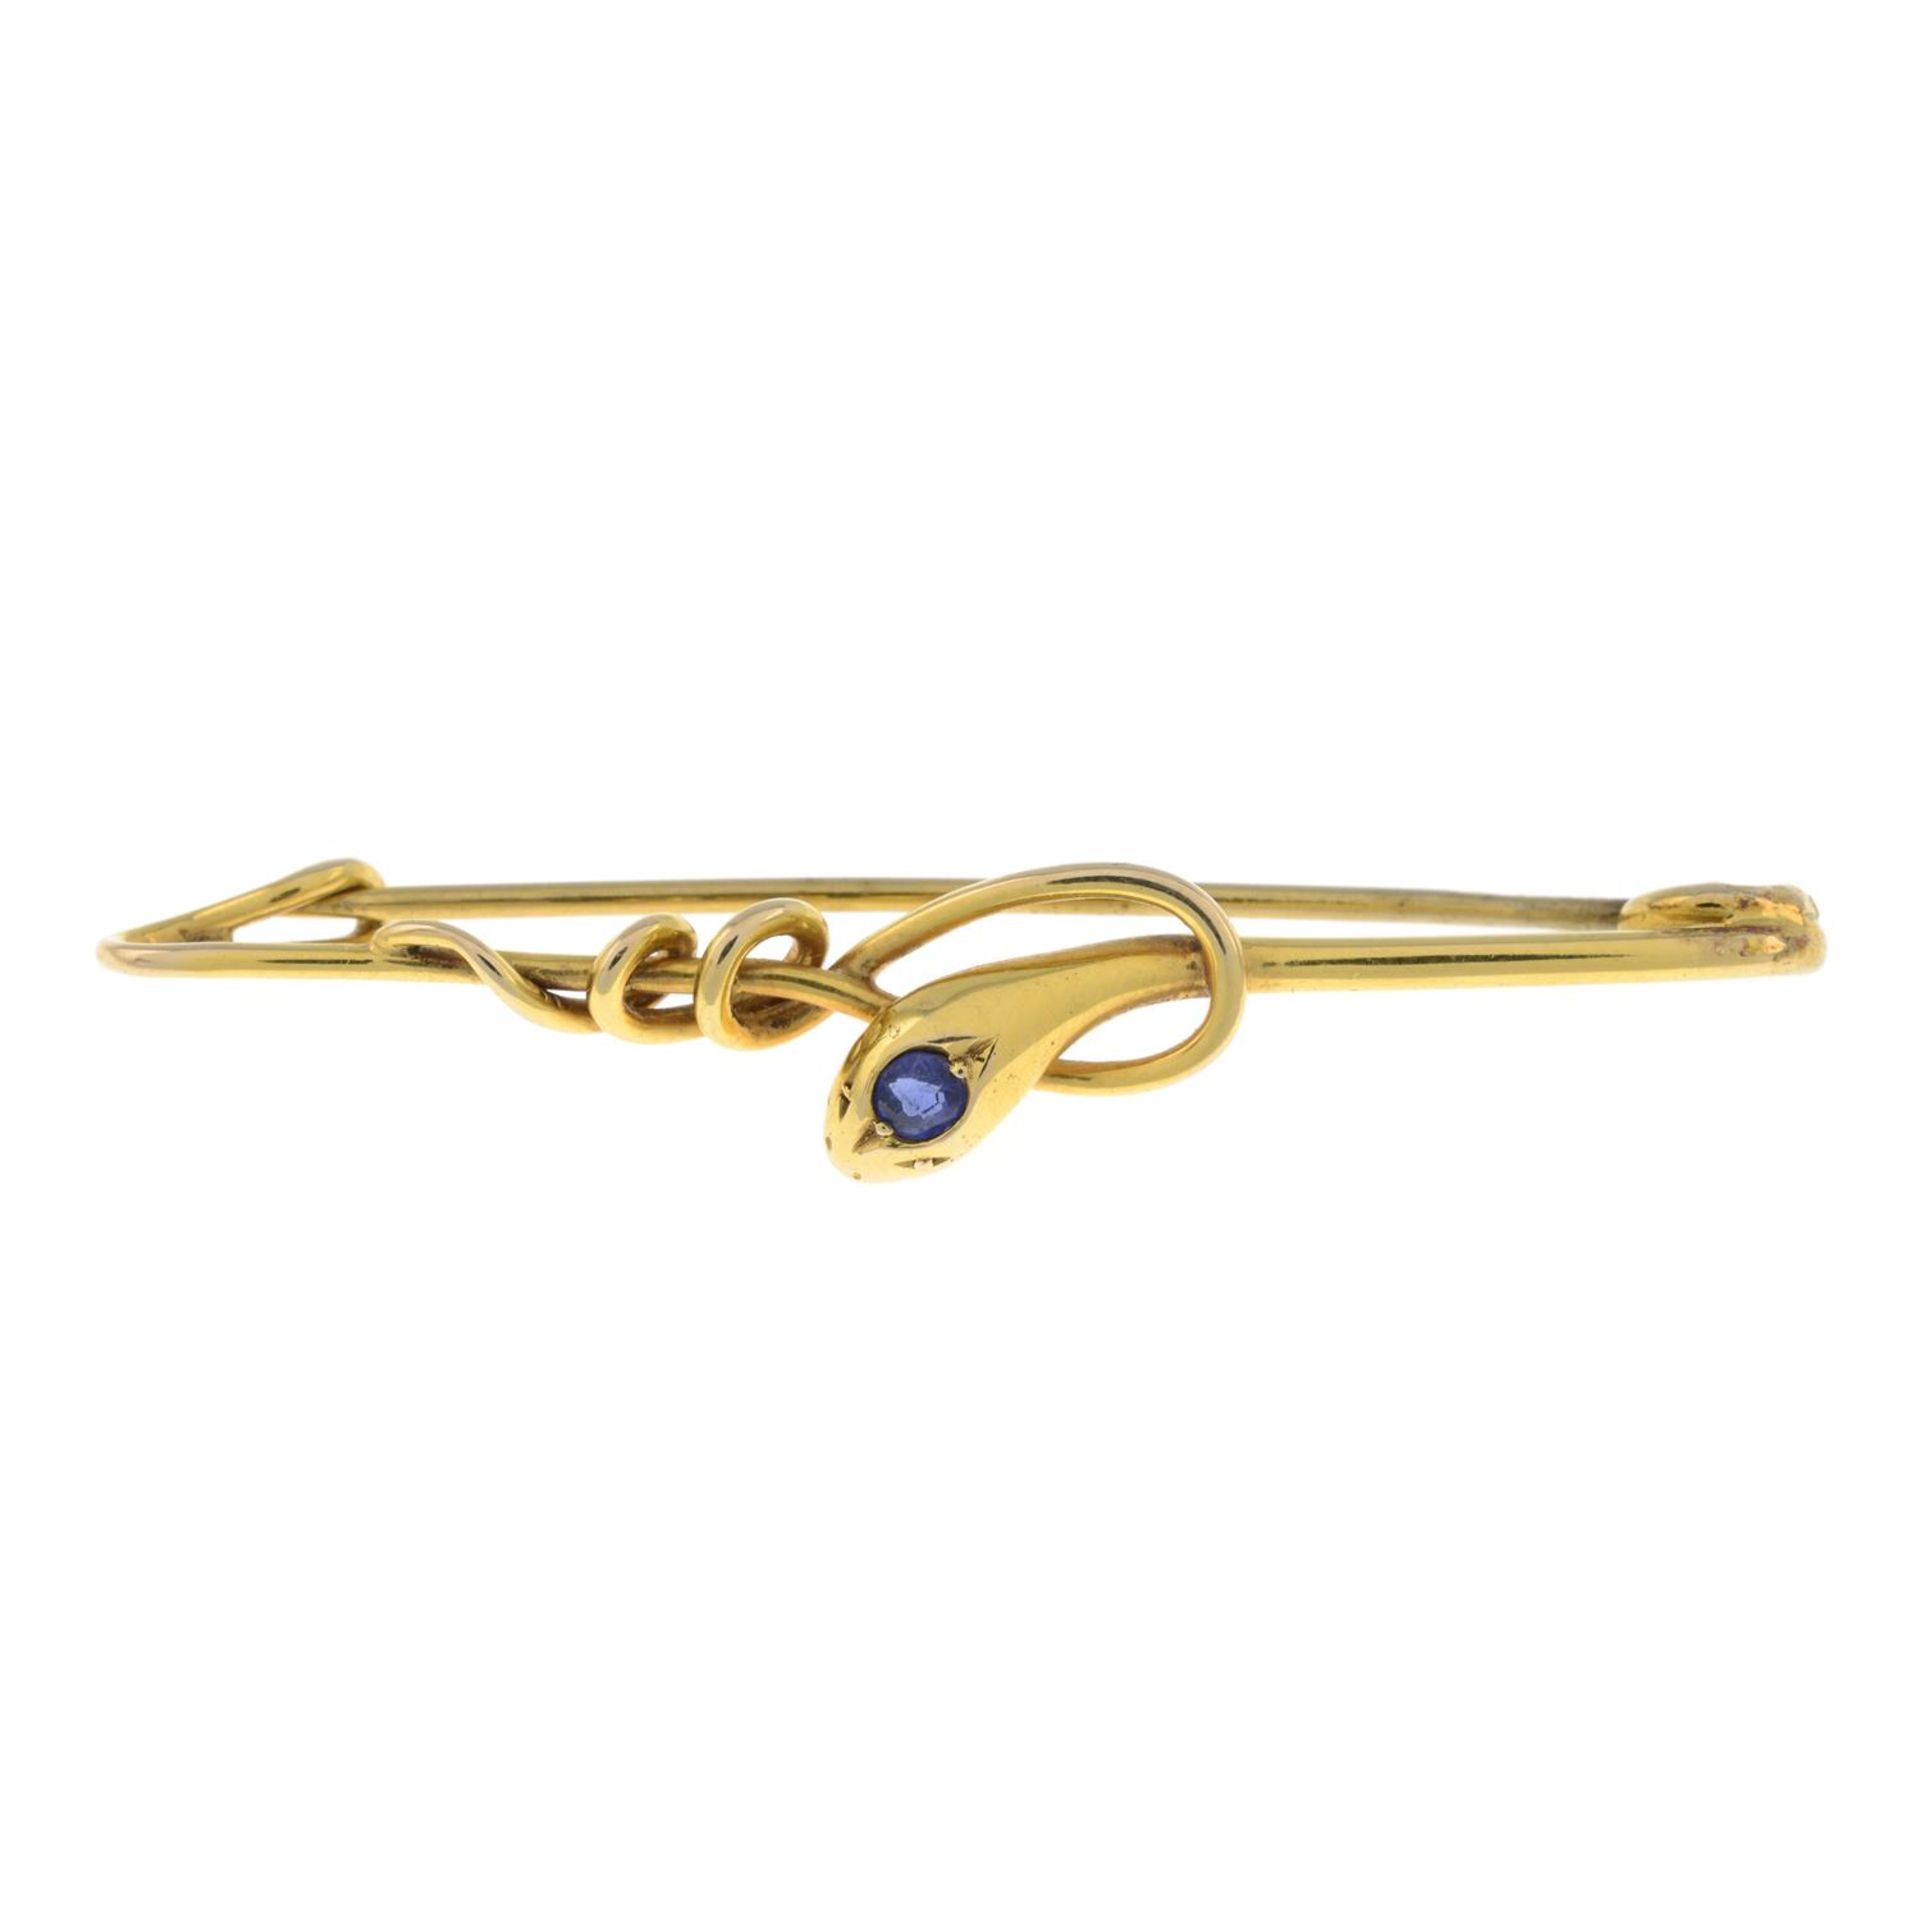 Victorian gold snake brooch, with sapphire crest